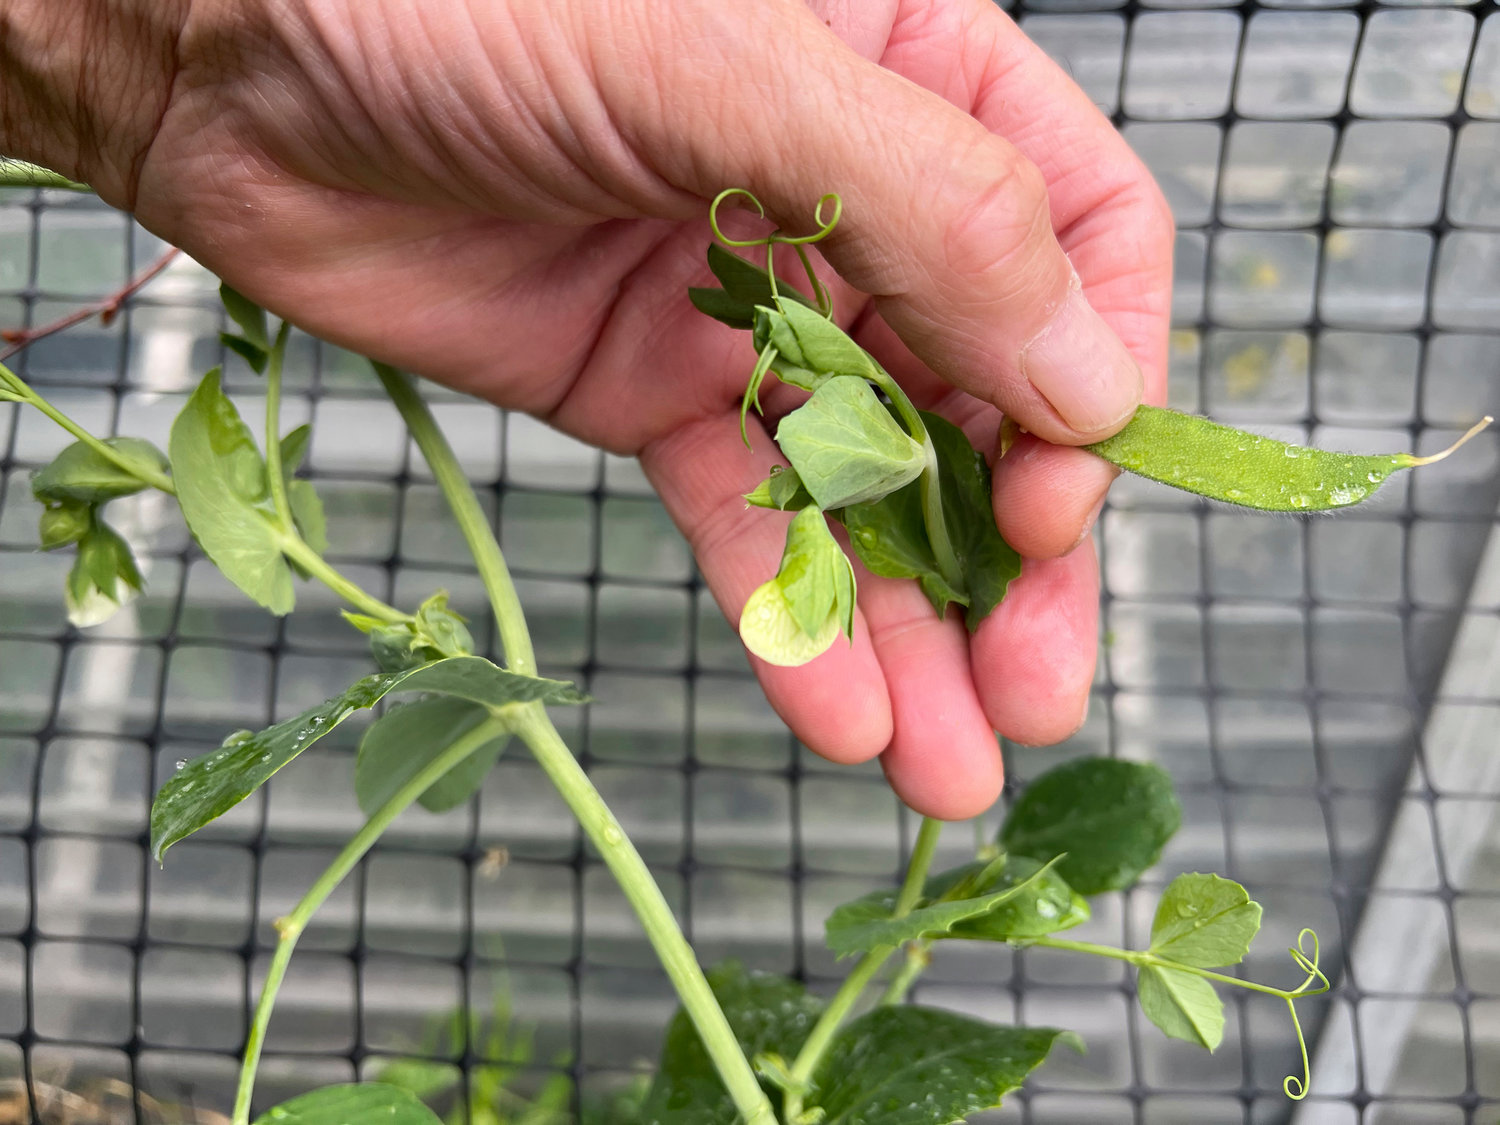 A snap pea pod plant in Anchorage, Alaska. Taking snap peas before they develop peas in the pod will keep the plant flowering and producing.